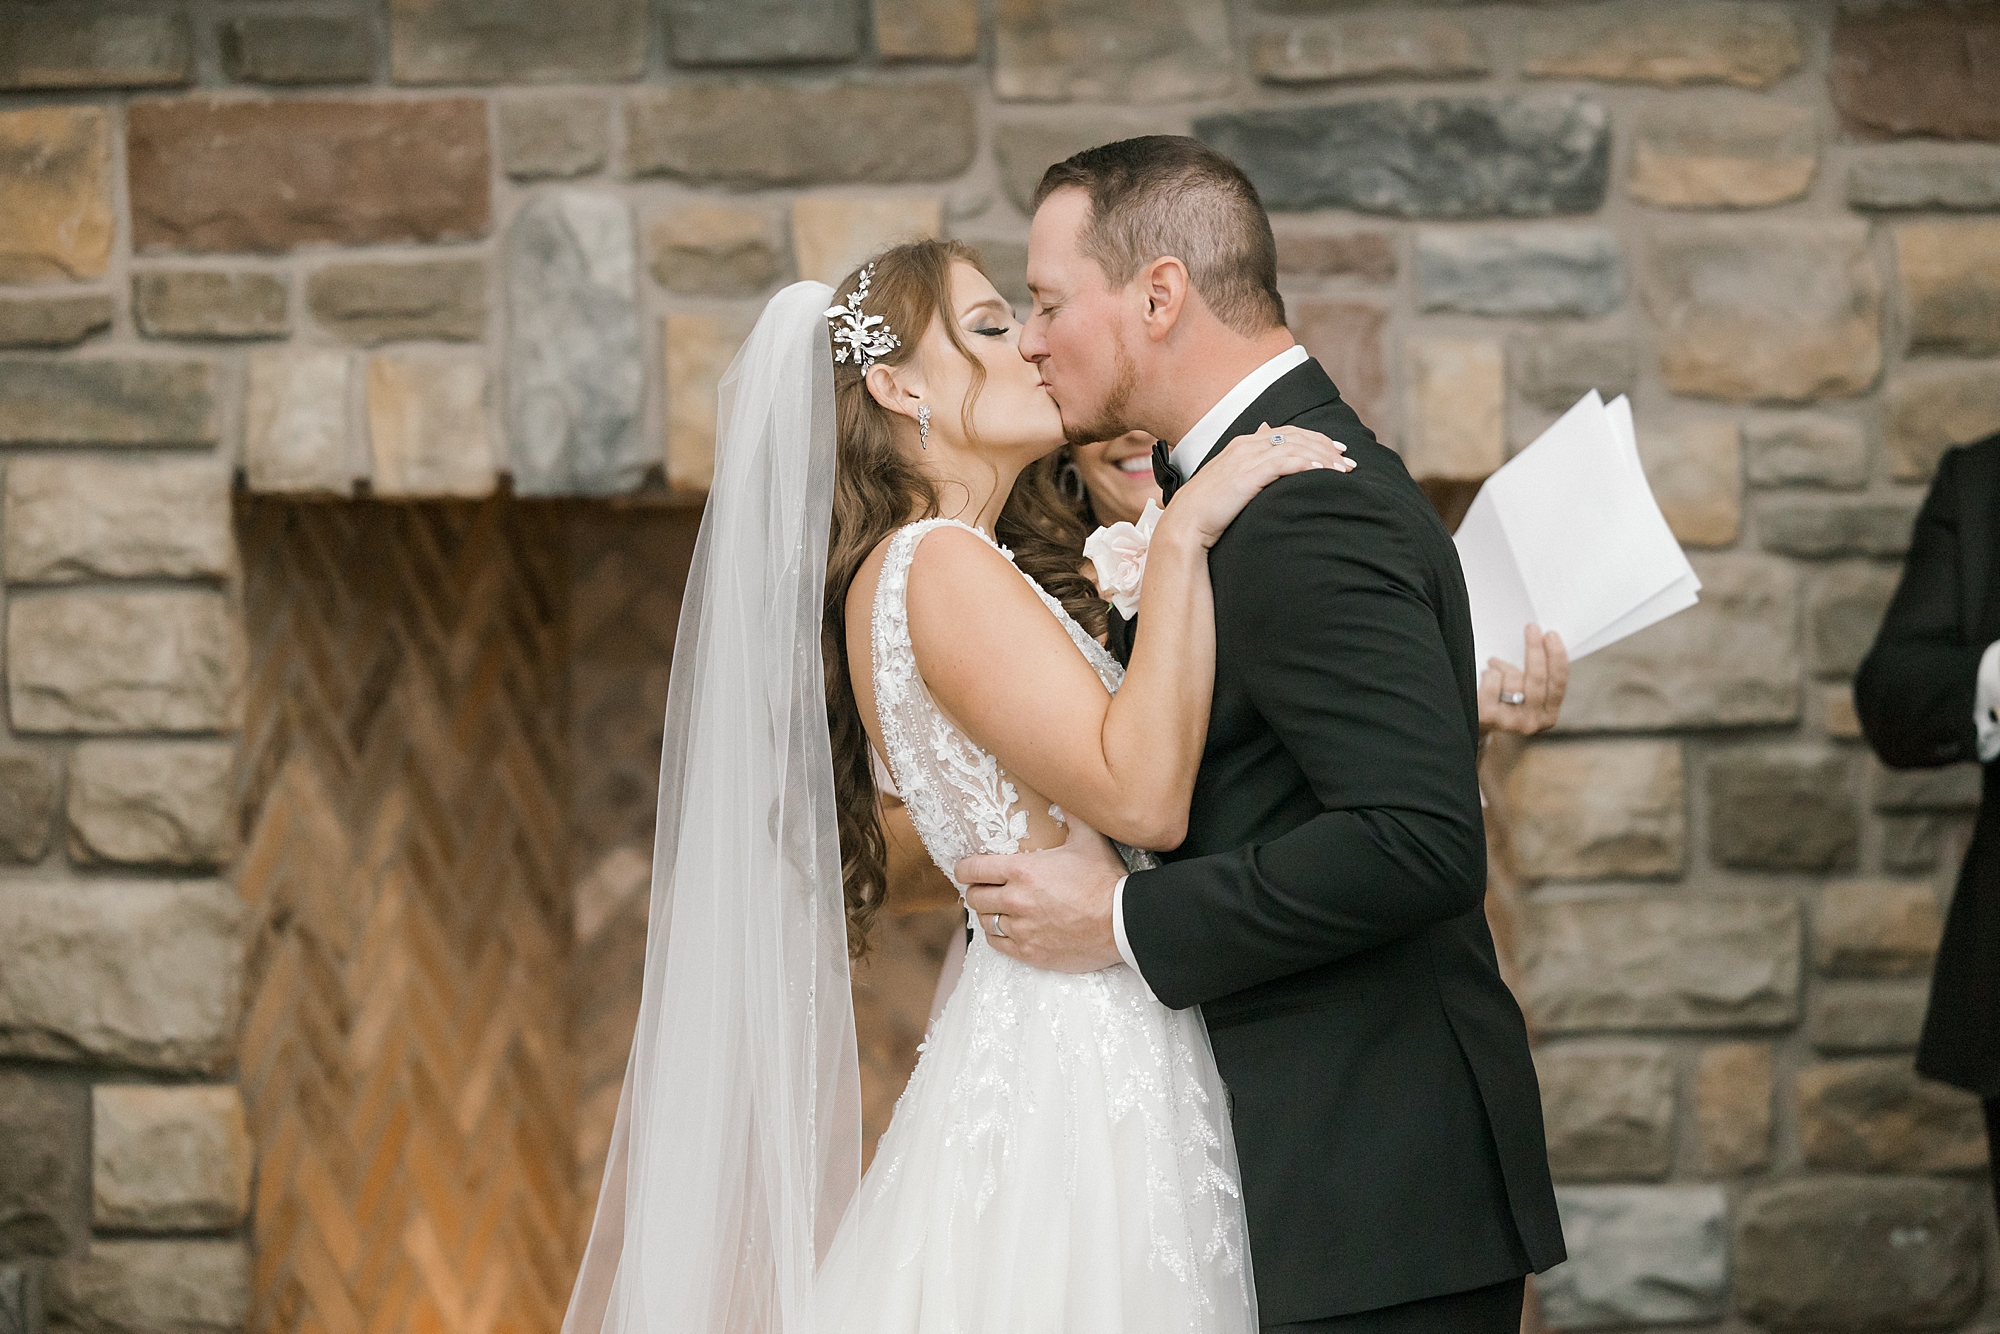 bride and groom kiss during wedding ceremony by stone fireplace